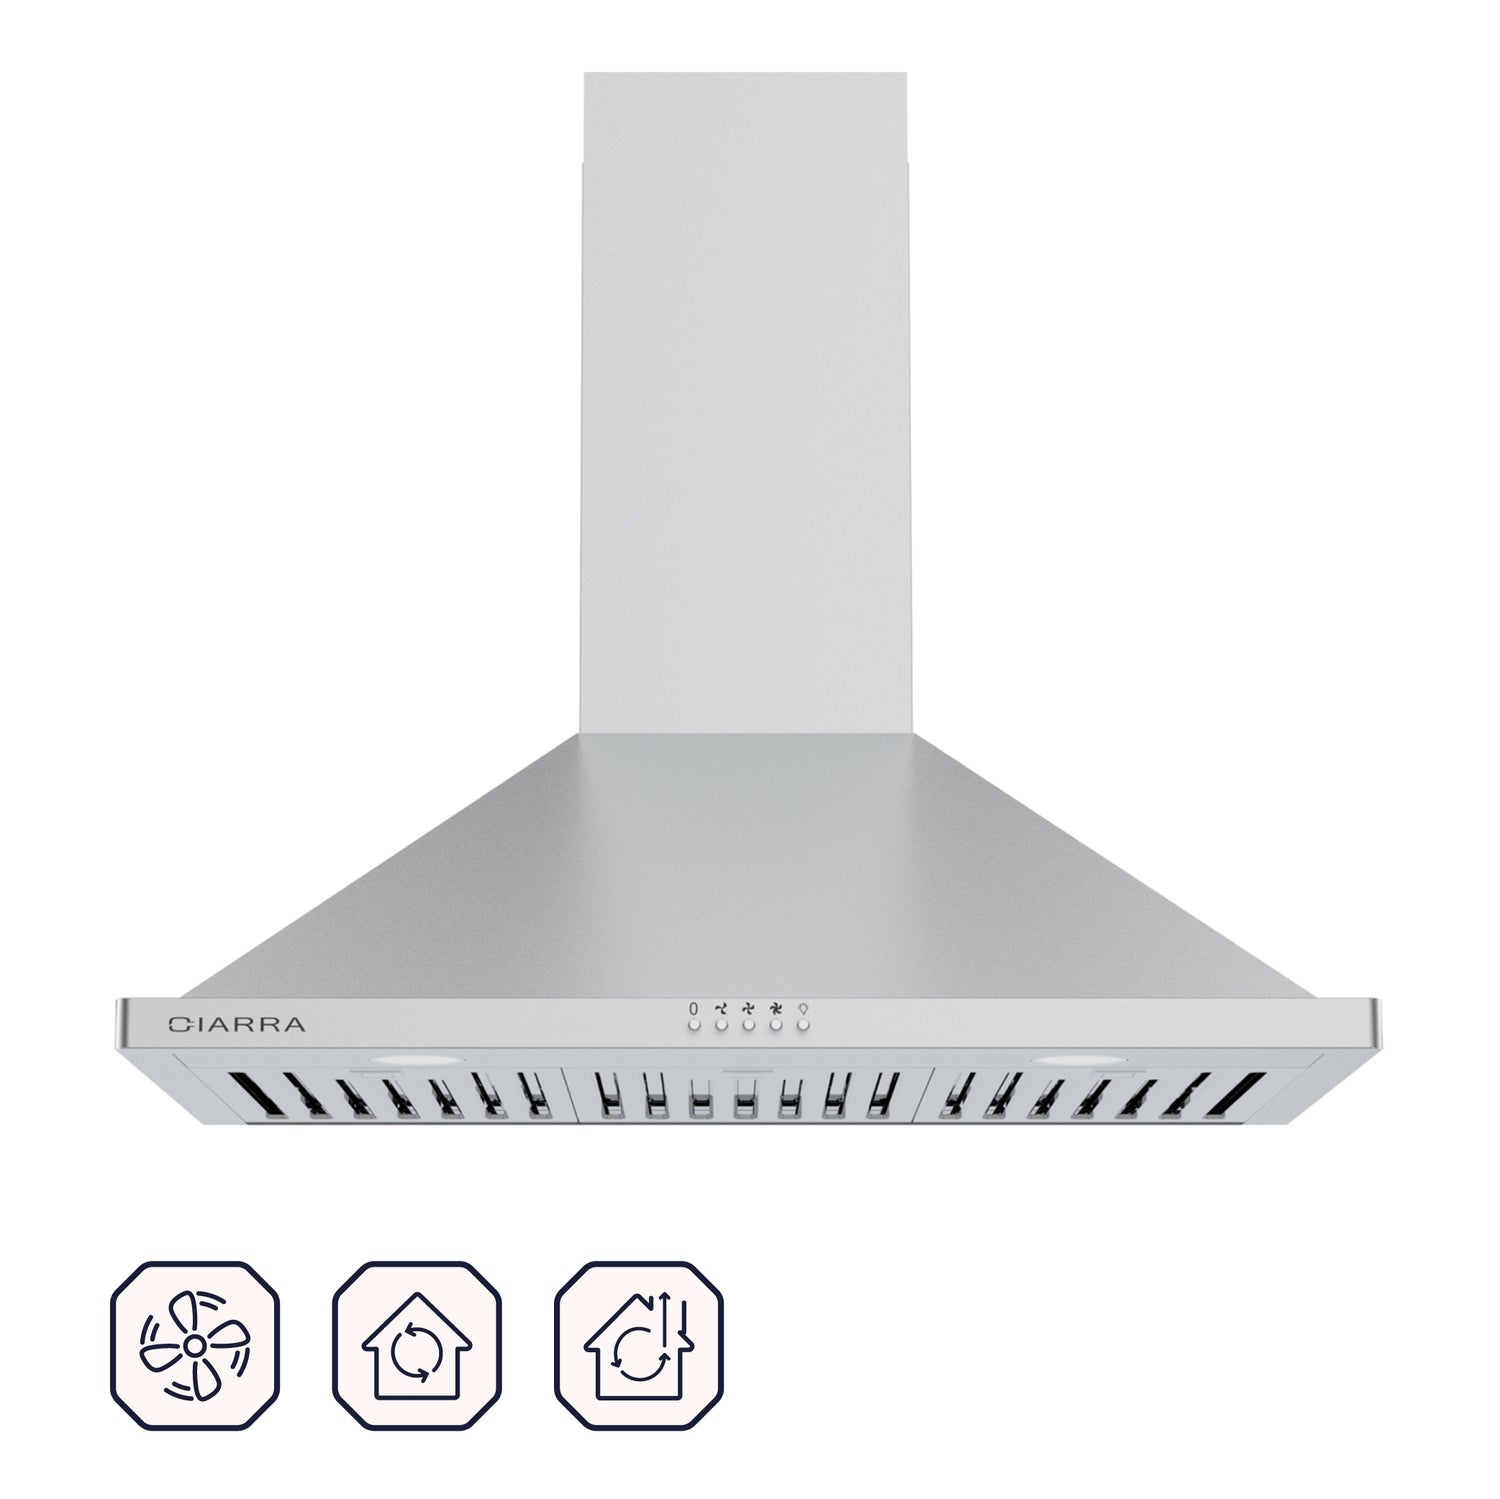 CIARRA 30 Inch Wall Mount Range Hood with 3-speed Extraction CAS75302-OW